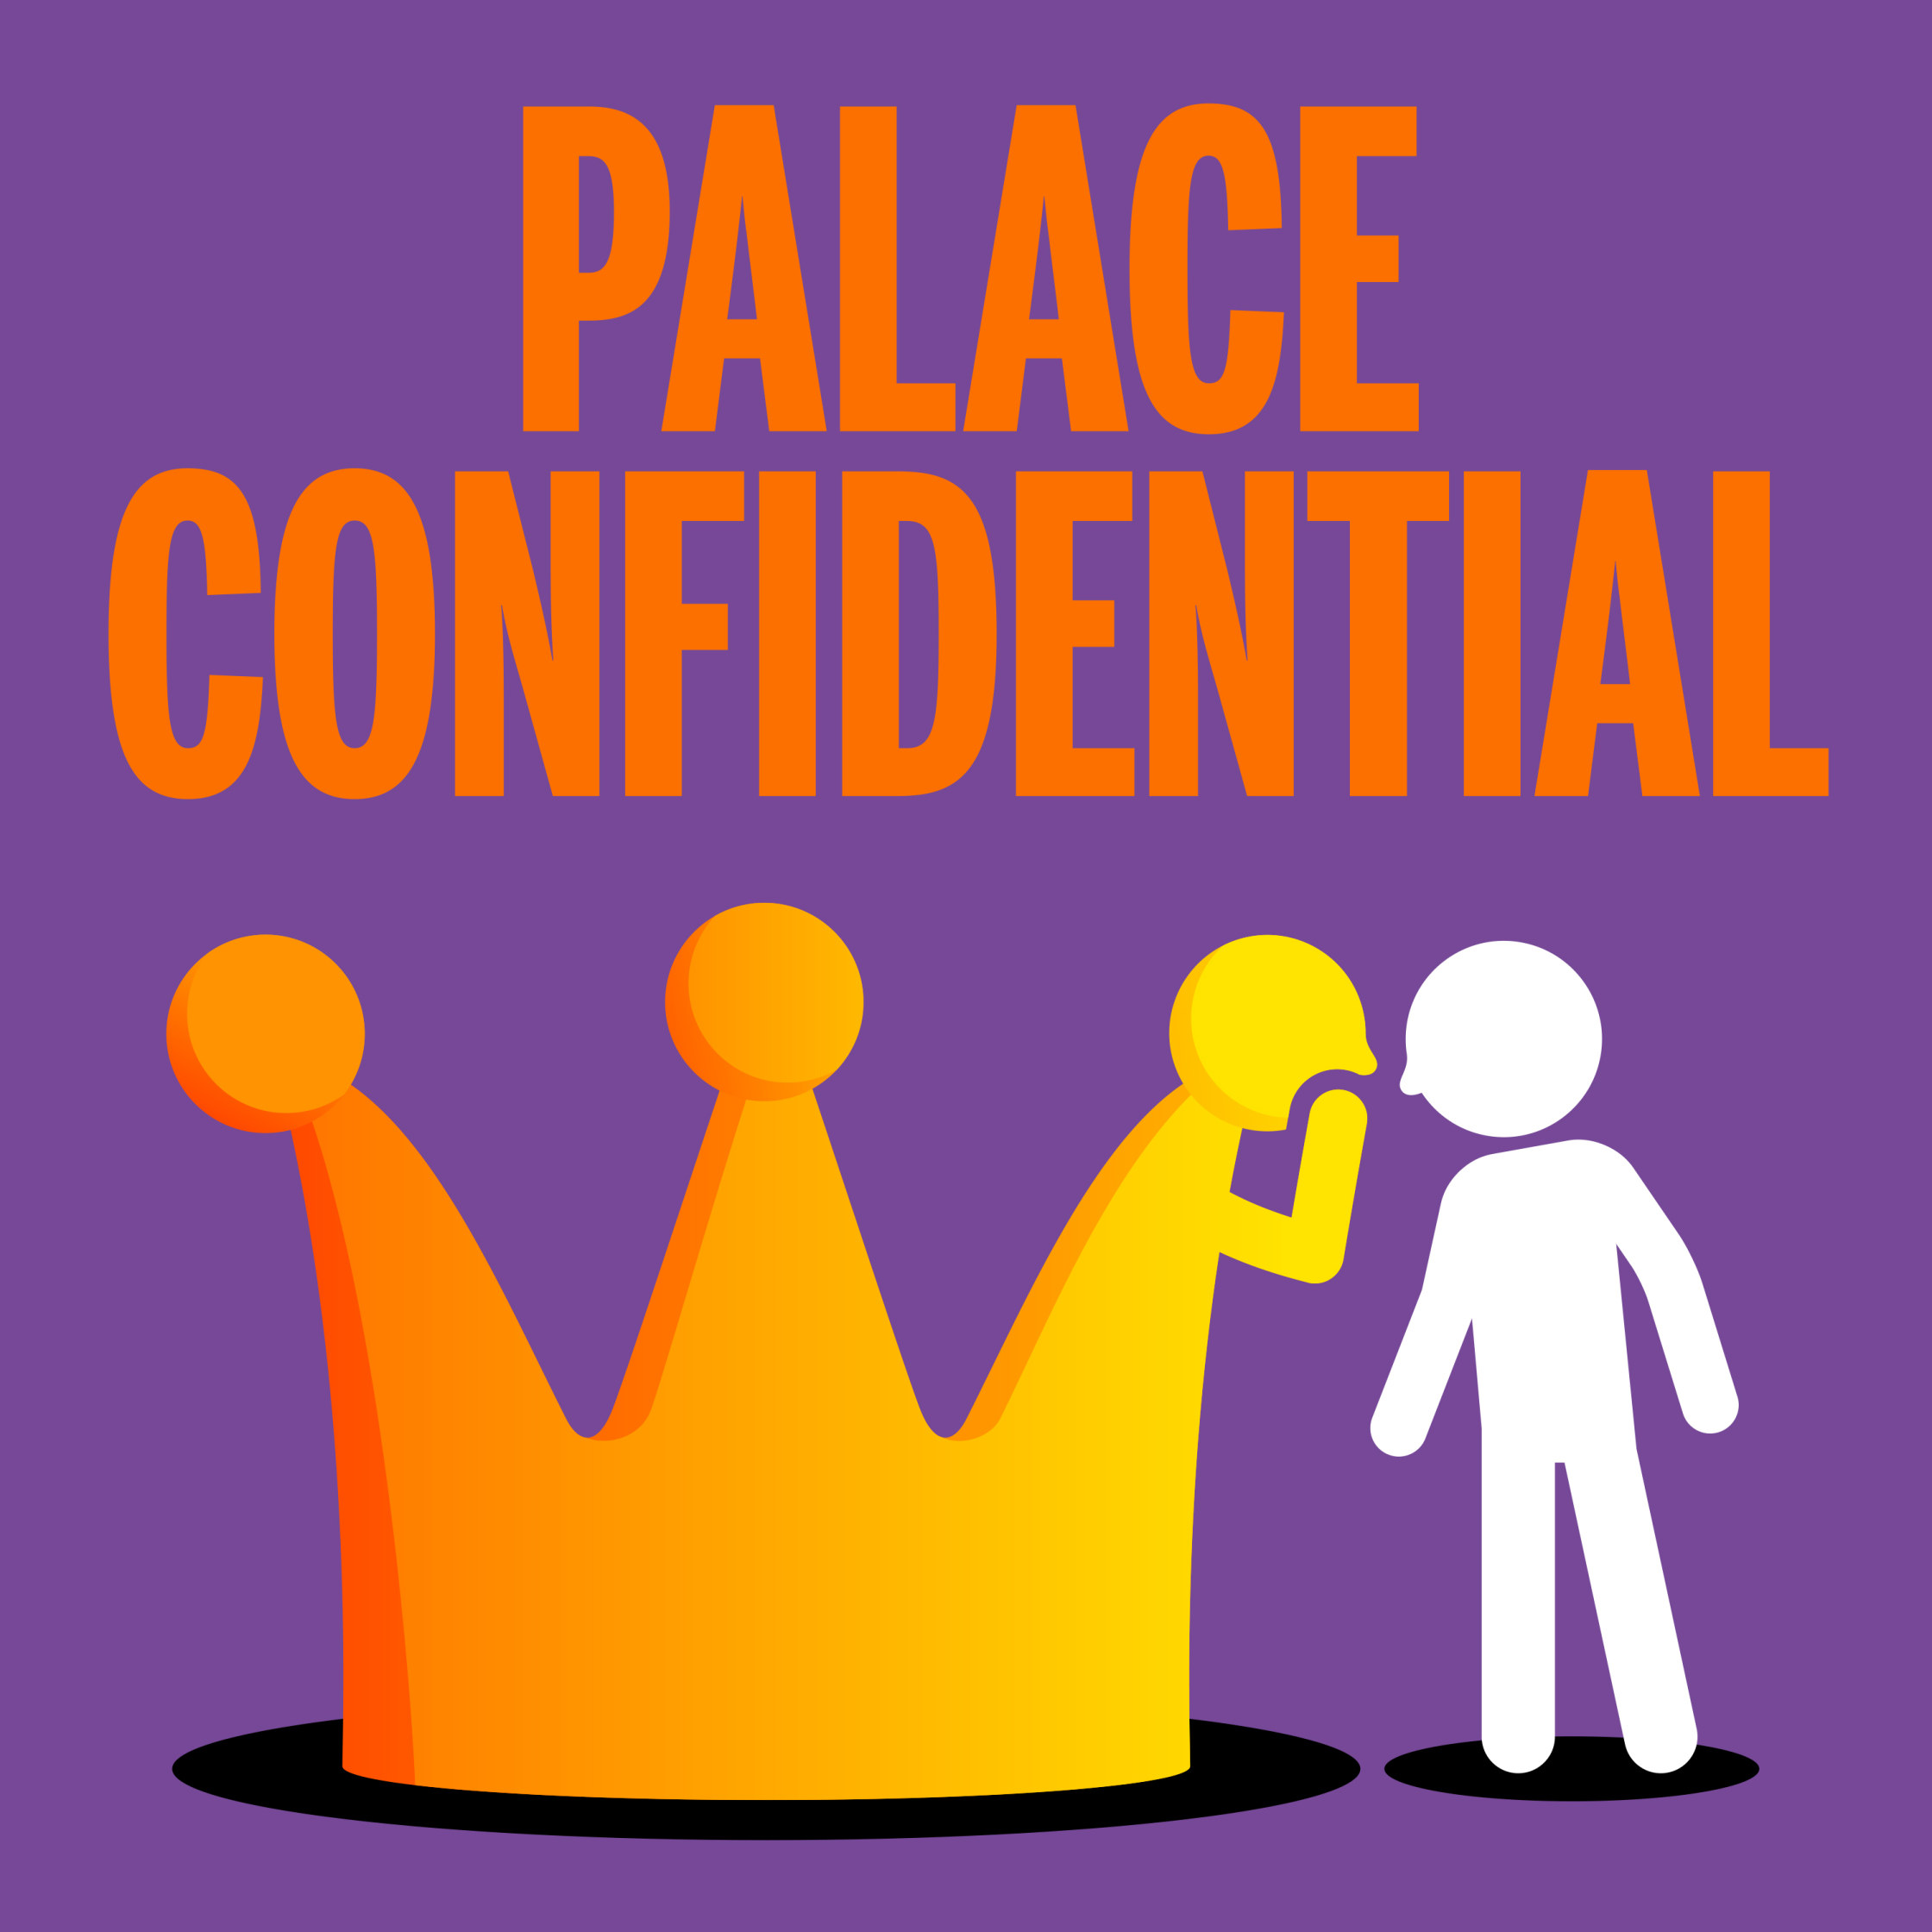 MailPlus-Podcast-Palace-Confidential.jpg